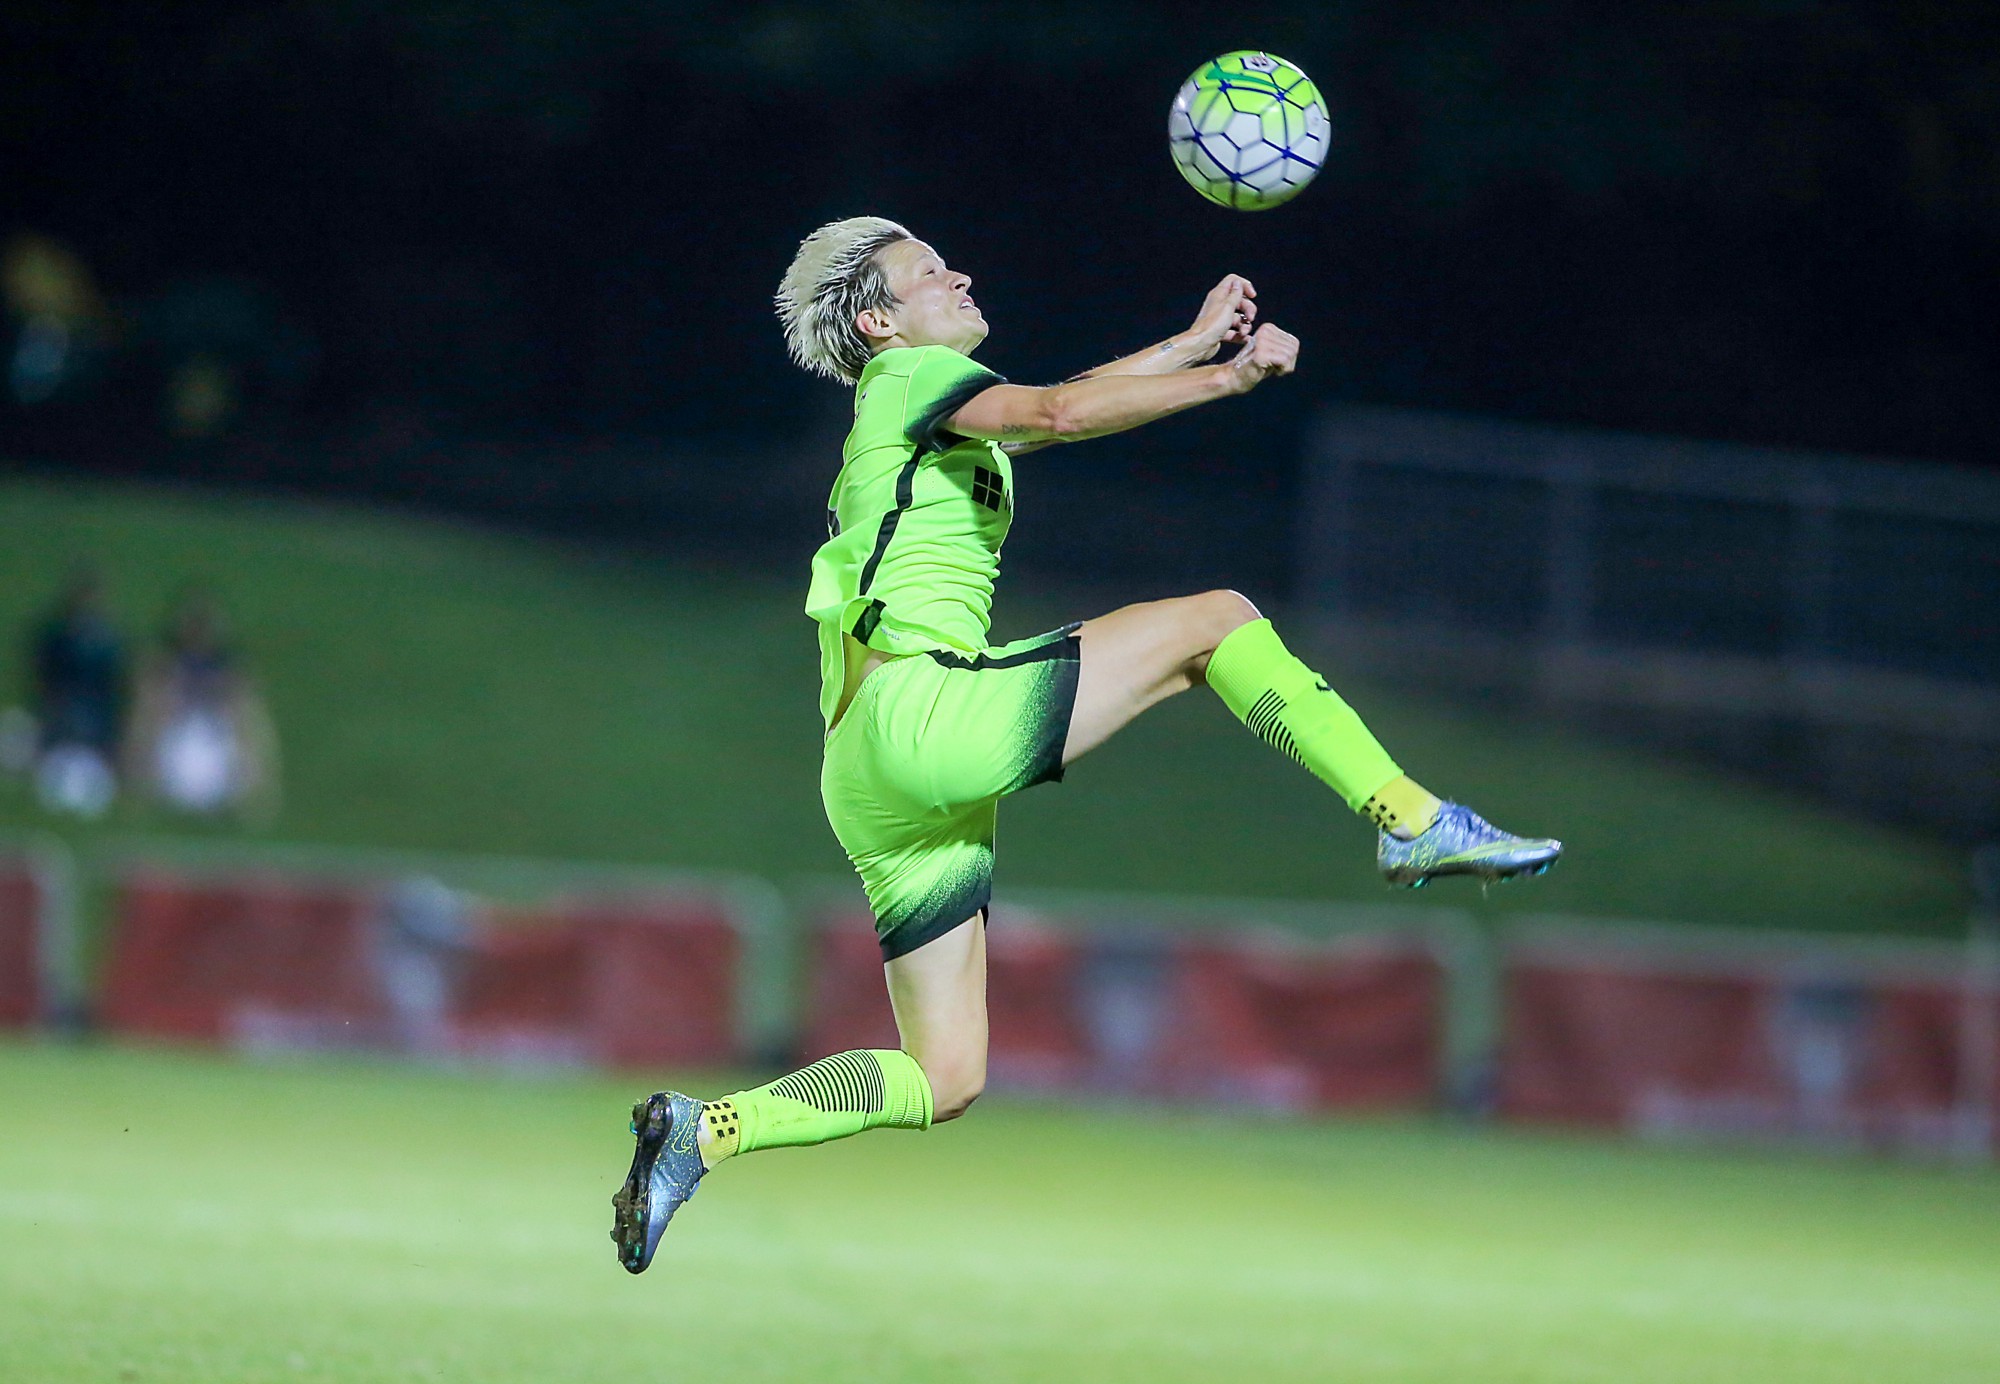 NWSL Soccer News: Washington Spirit Continue Stride Atop NWSL Table with Win Versus Seattle